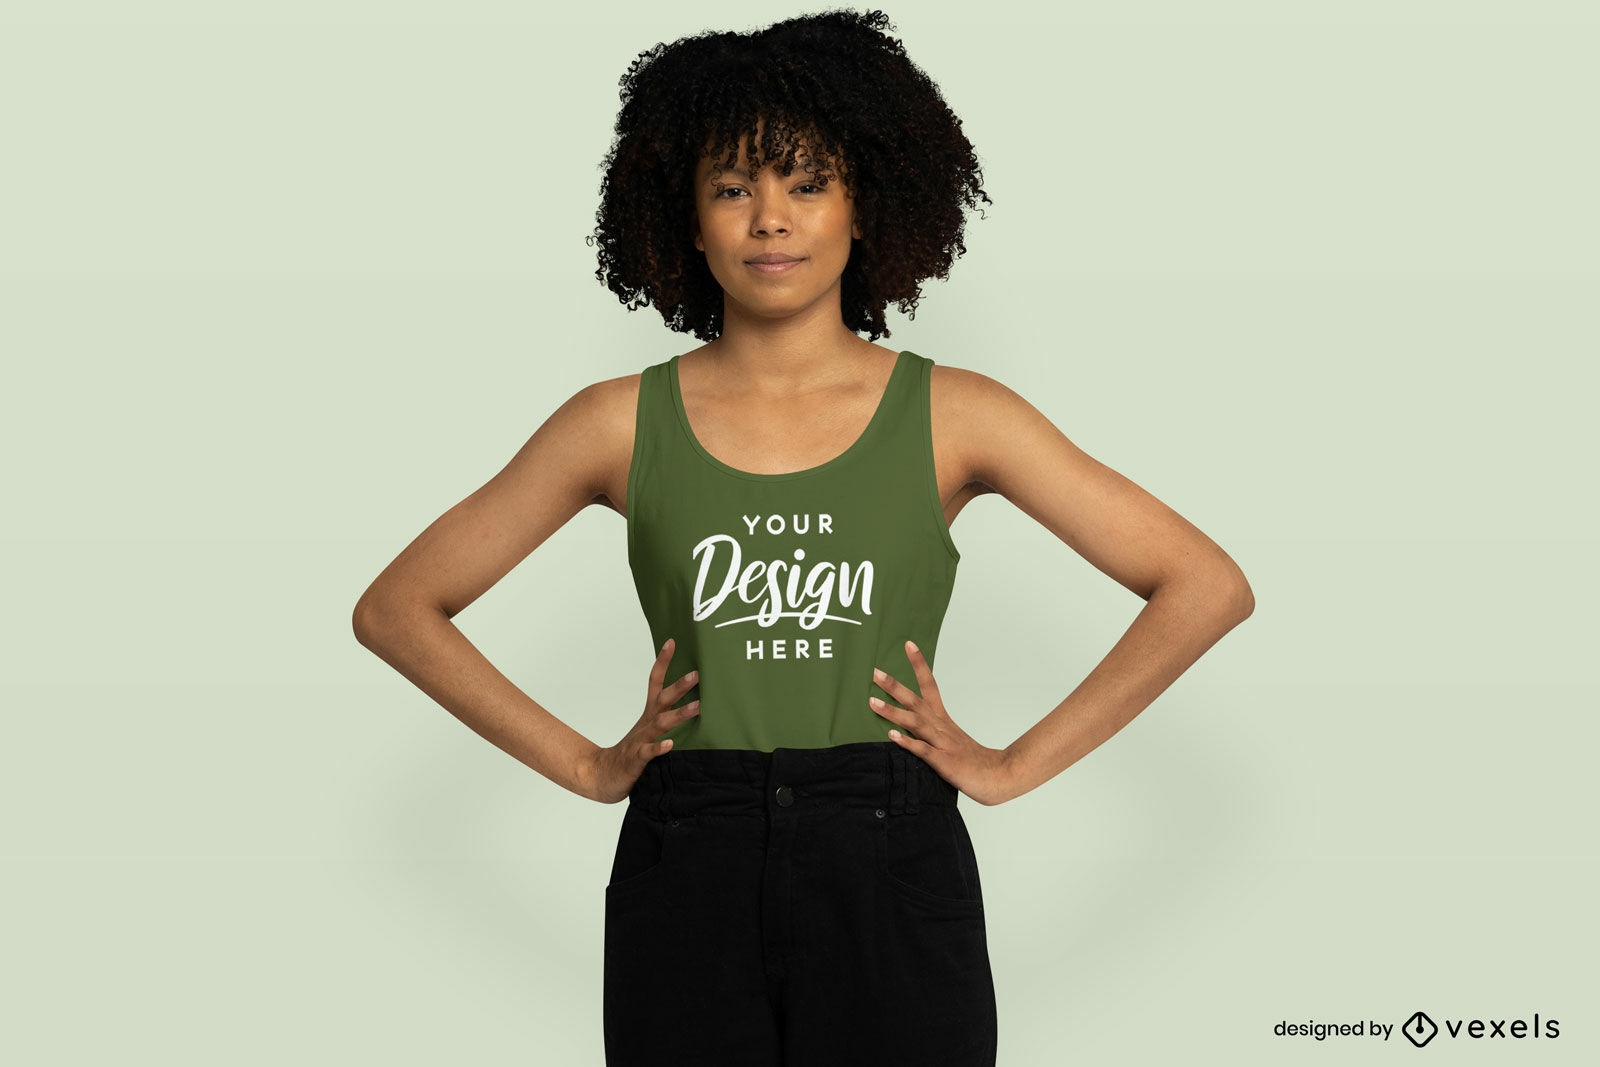 Black girl with curly hair in tank top mockup